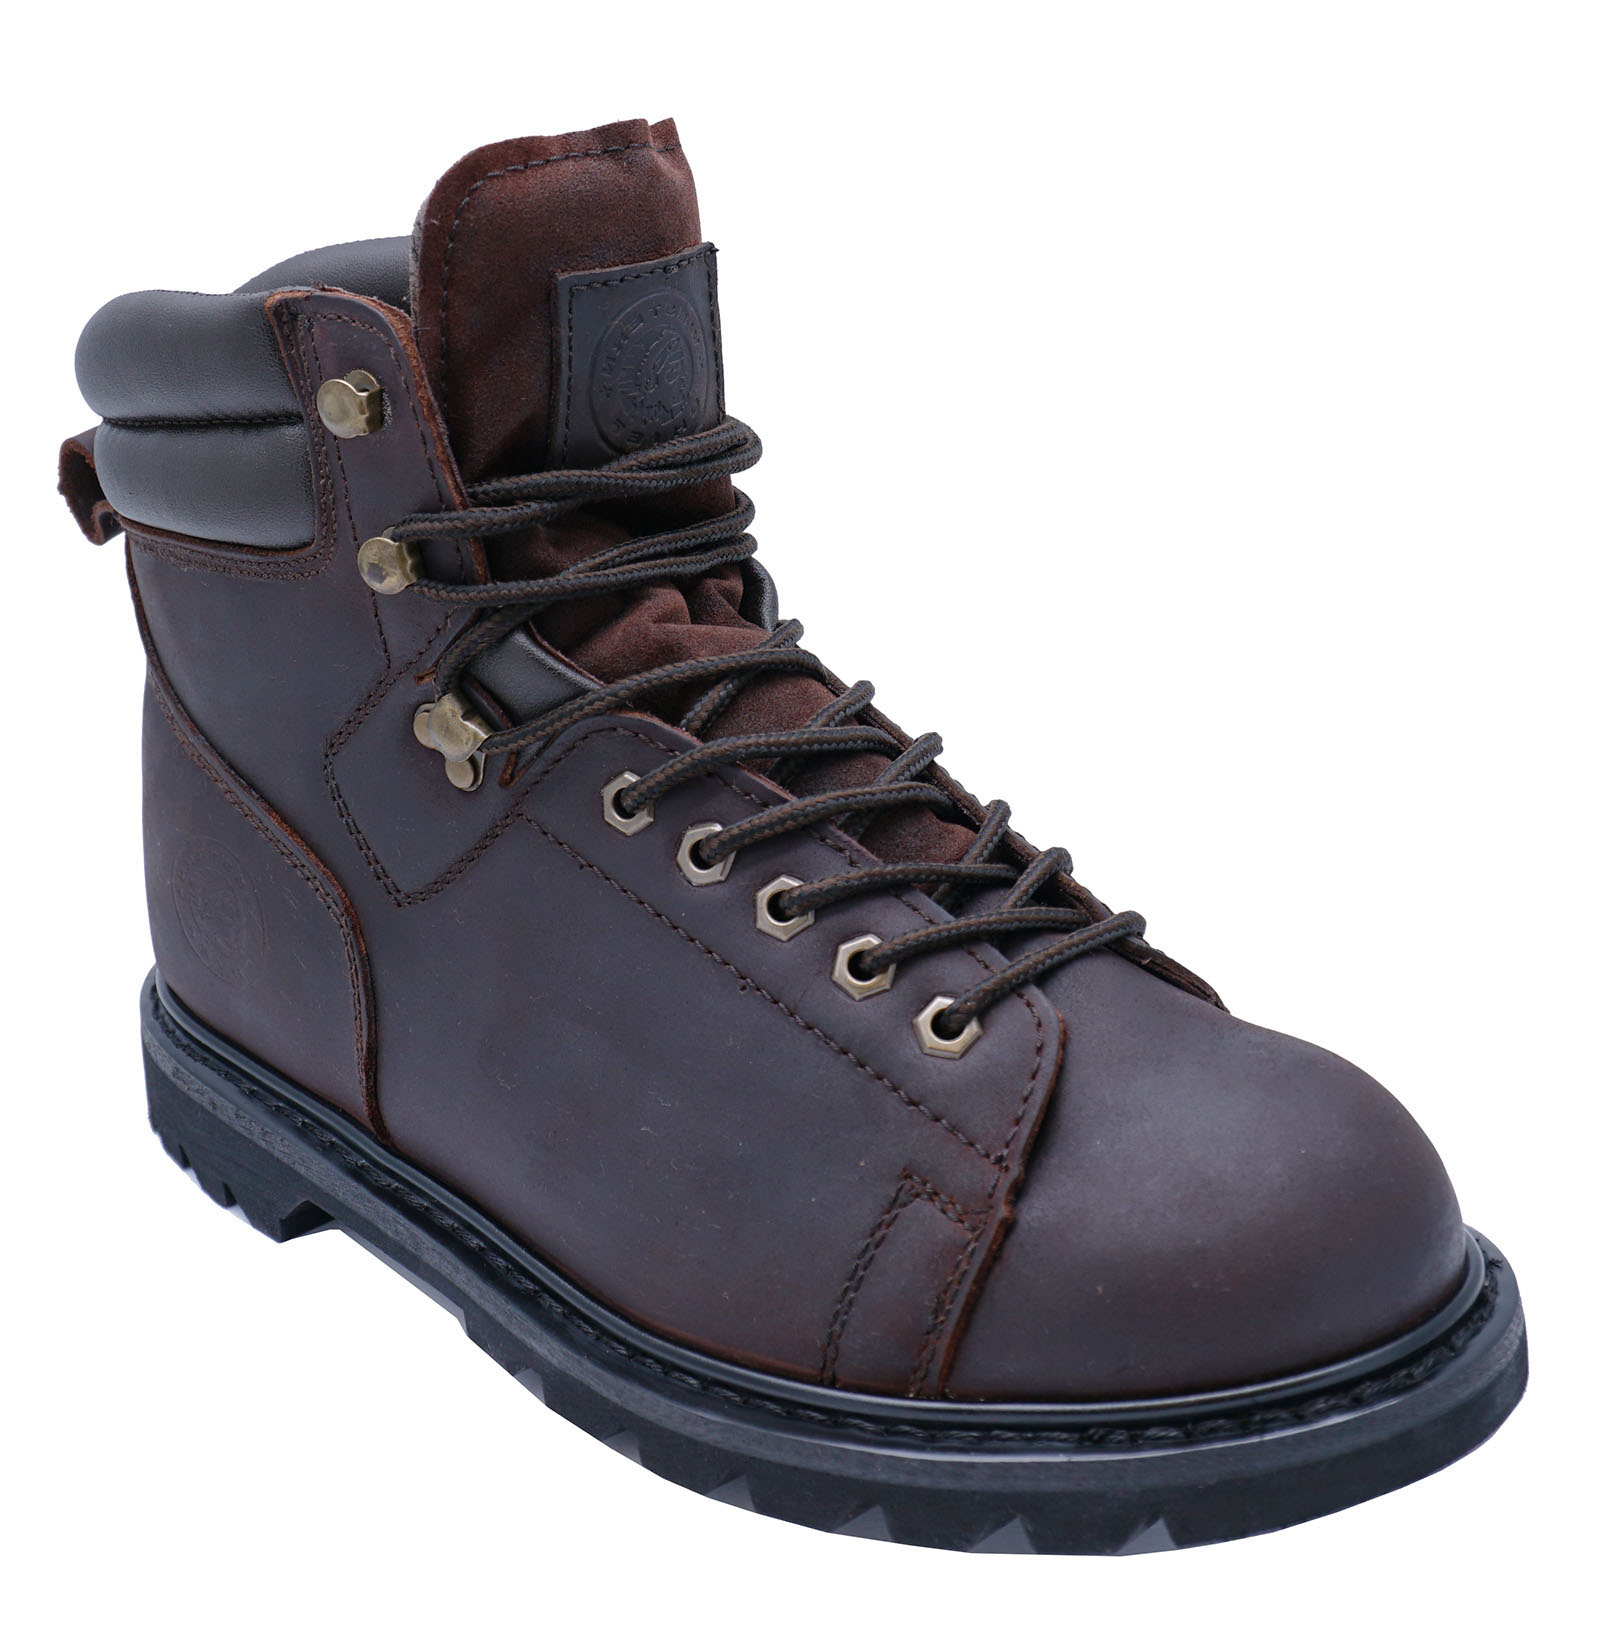 MENS BROWN LEATHER WESTERN CHIEF WIDE-FIT E LACE-UP ANKLE WORK BOOTS UK ...